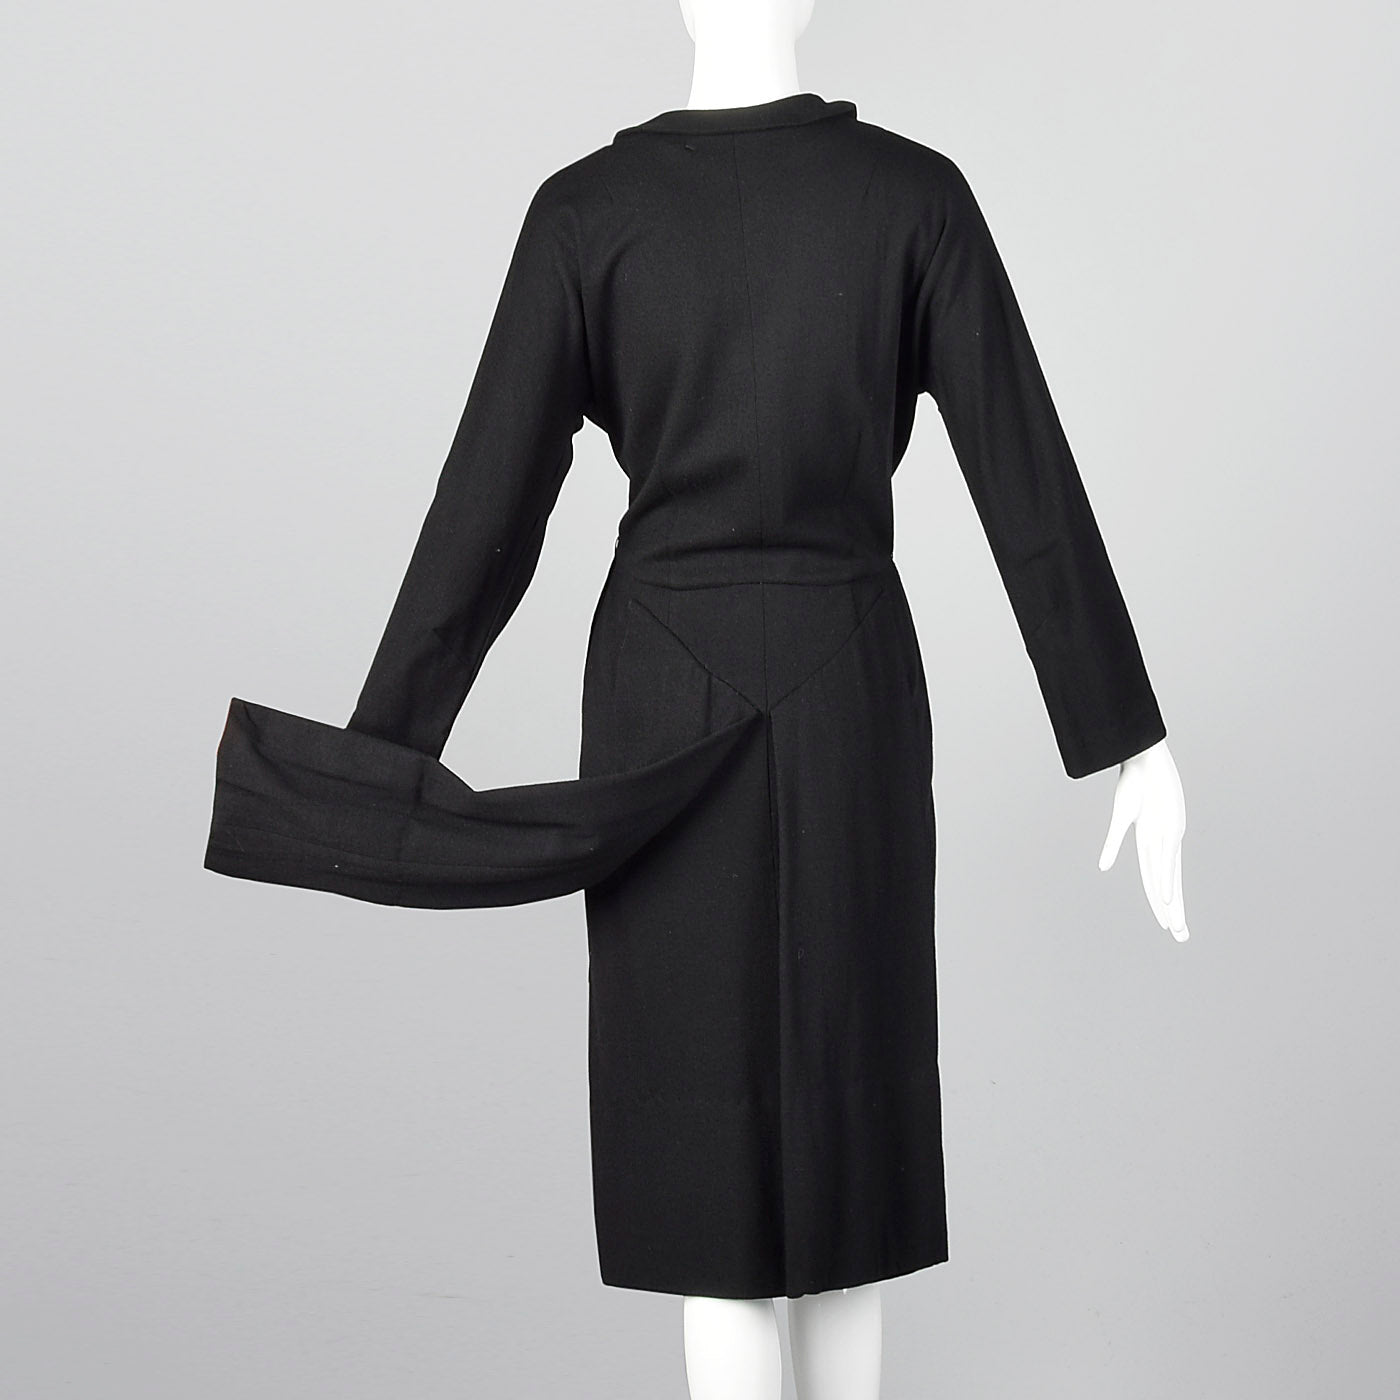 1940s Black Knit Dress with Tails